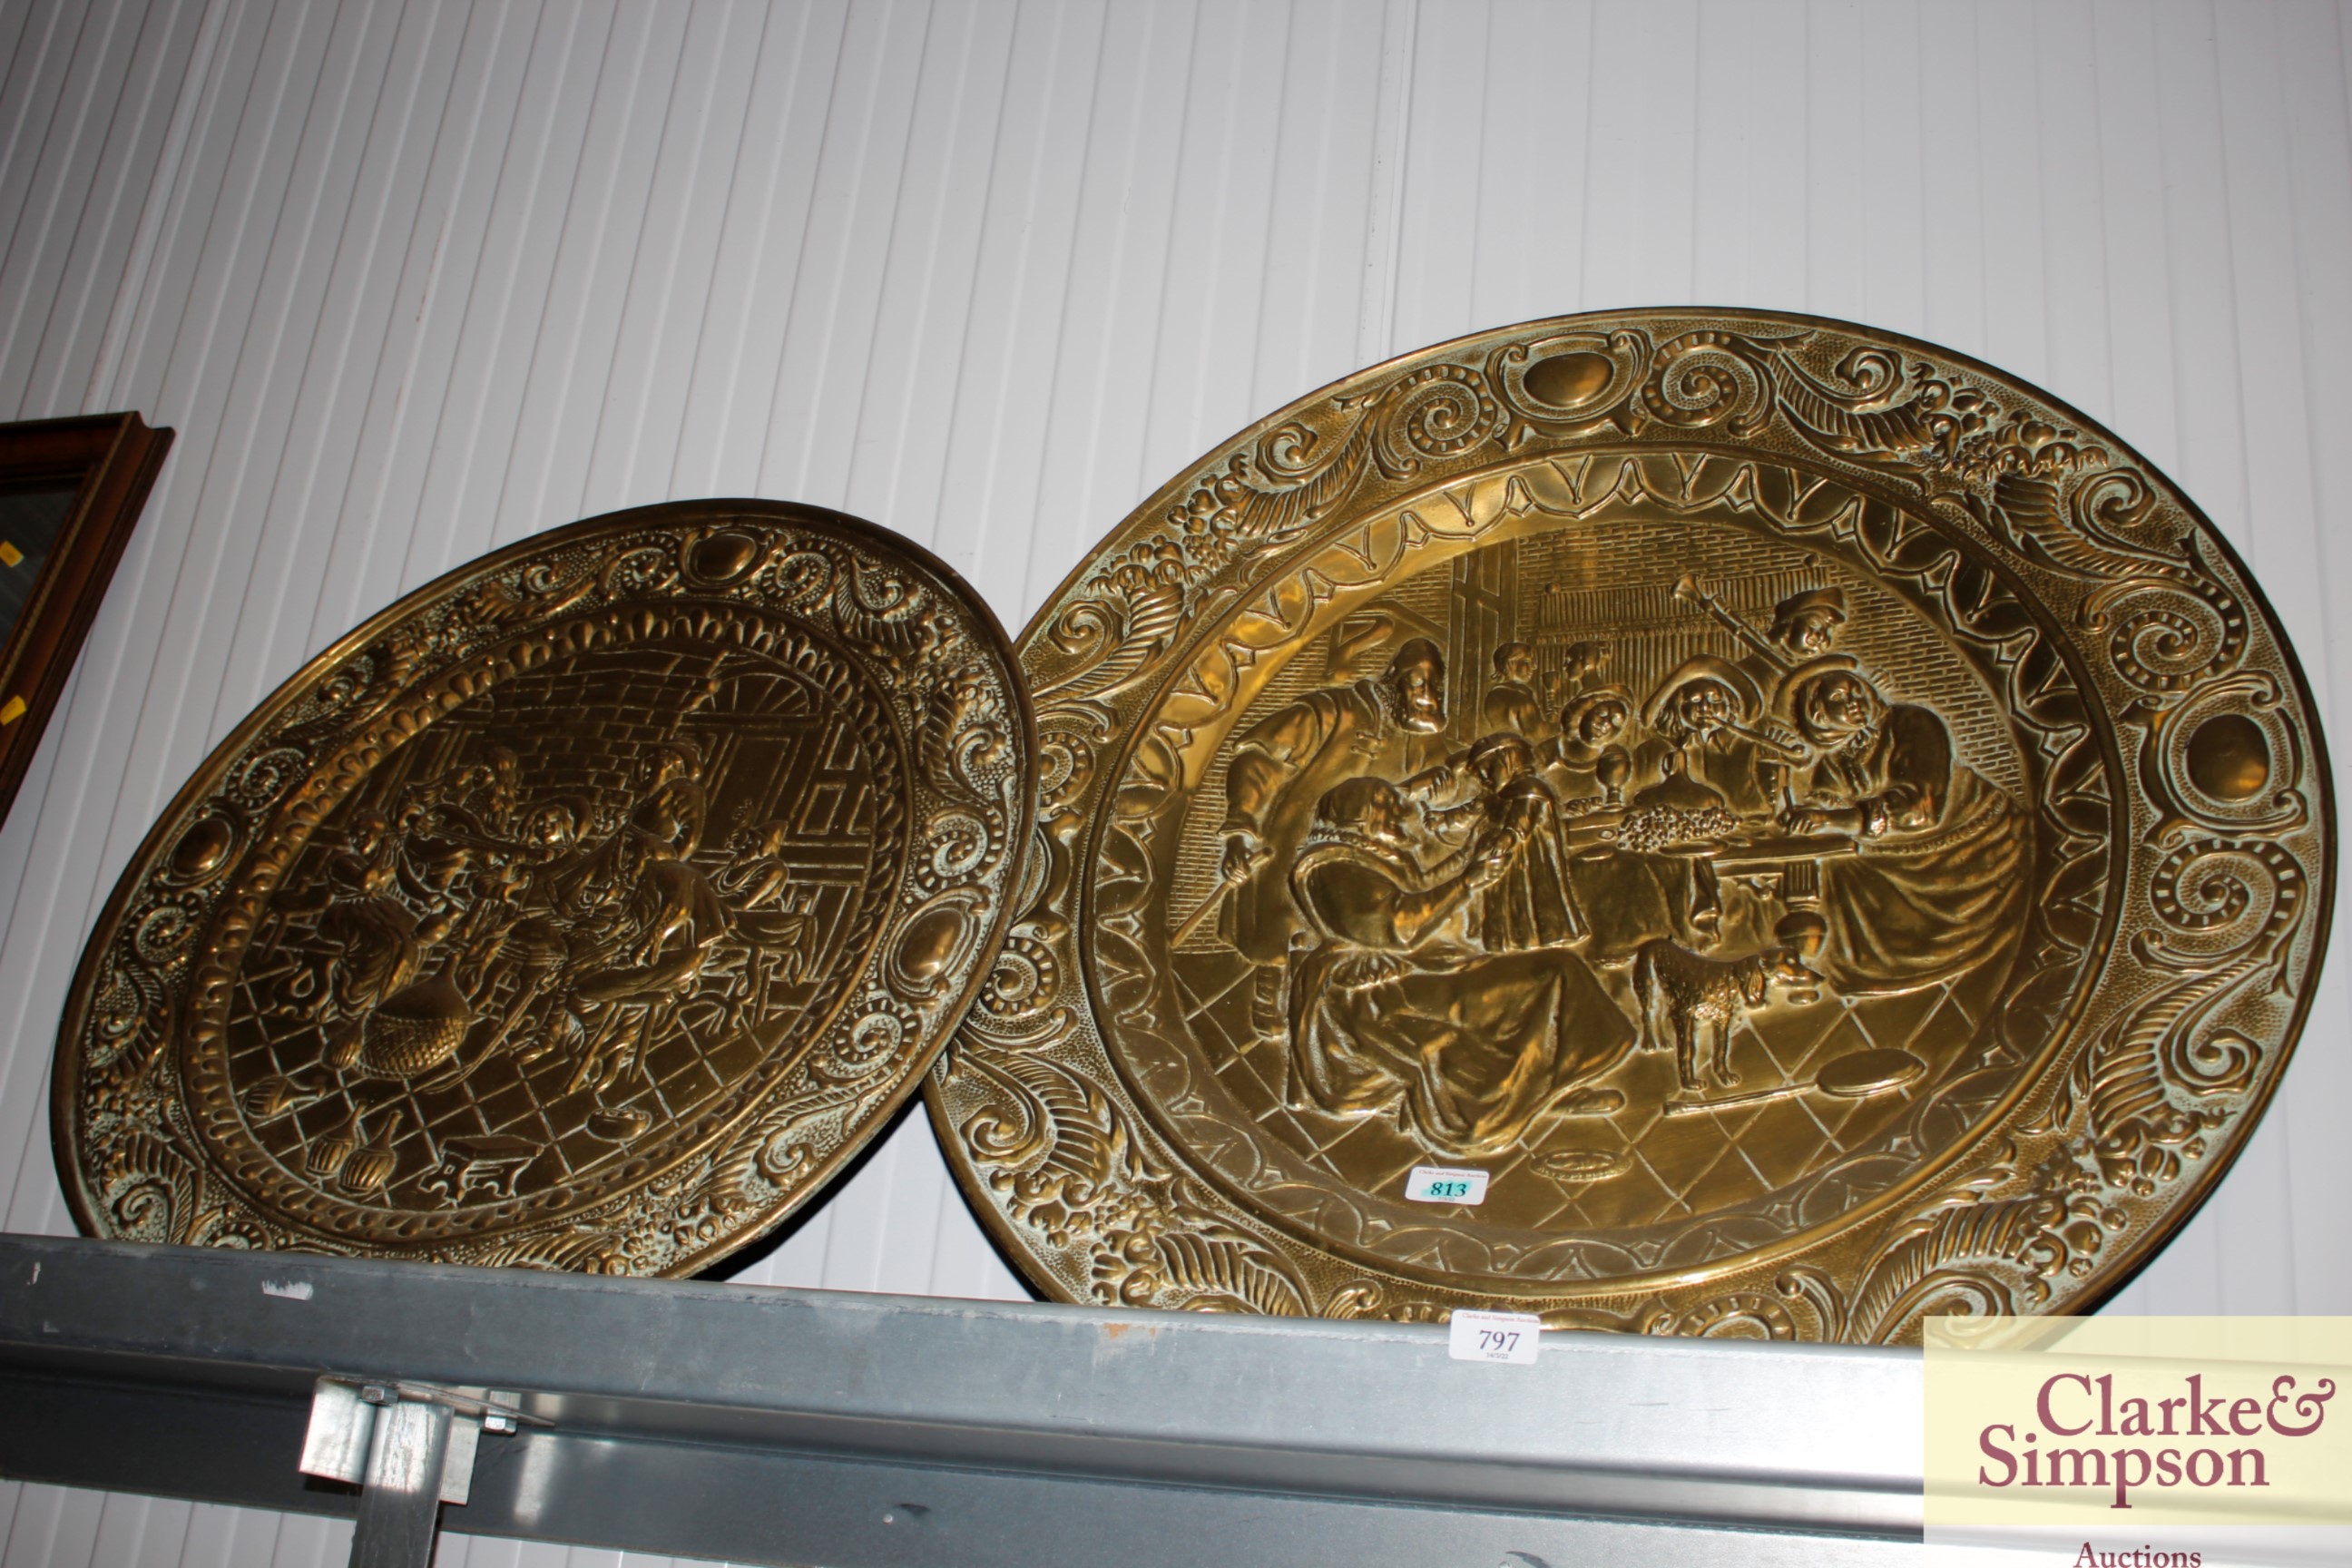 Two circular brass embossed plaques depicting tavern scenes